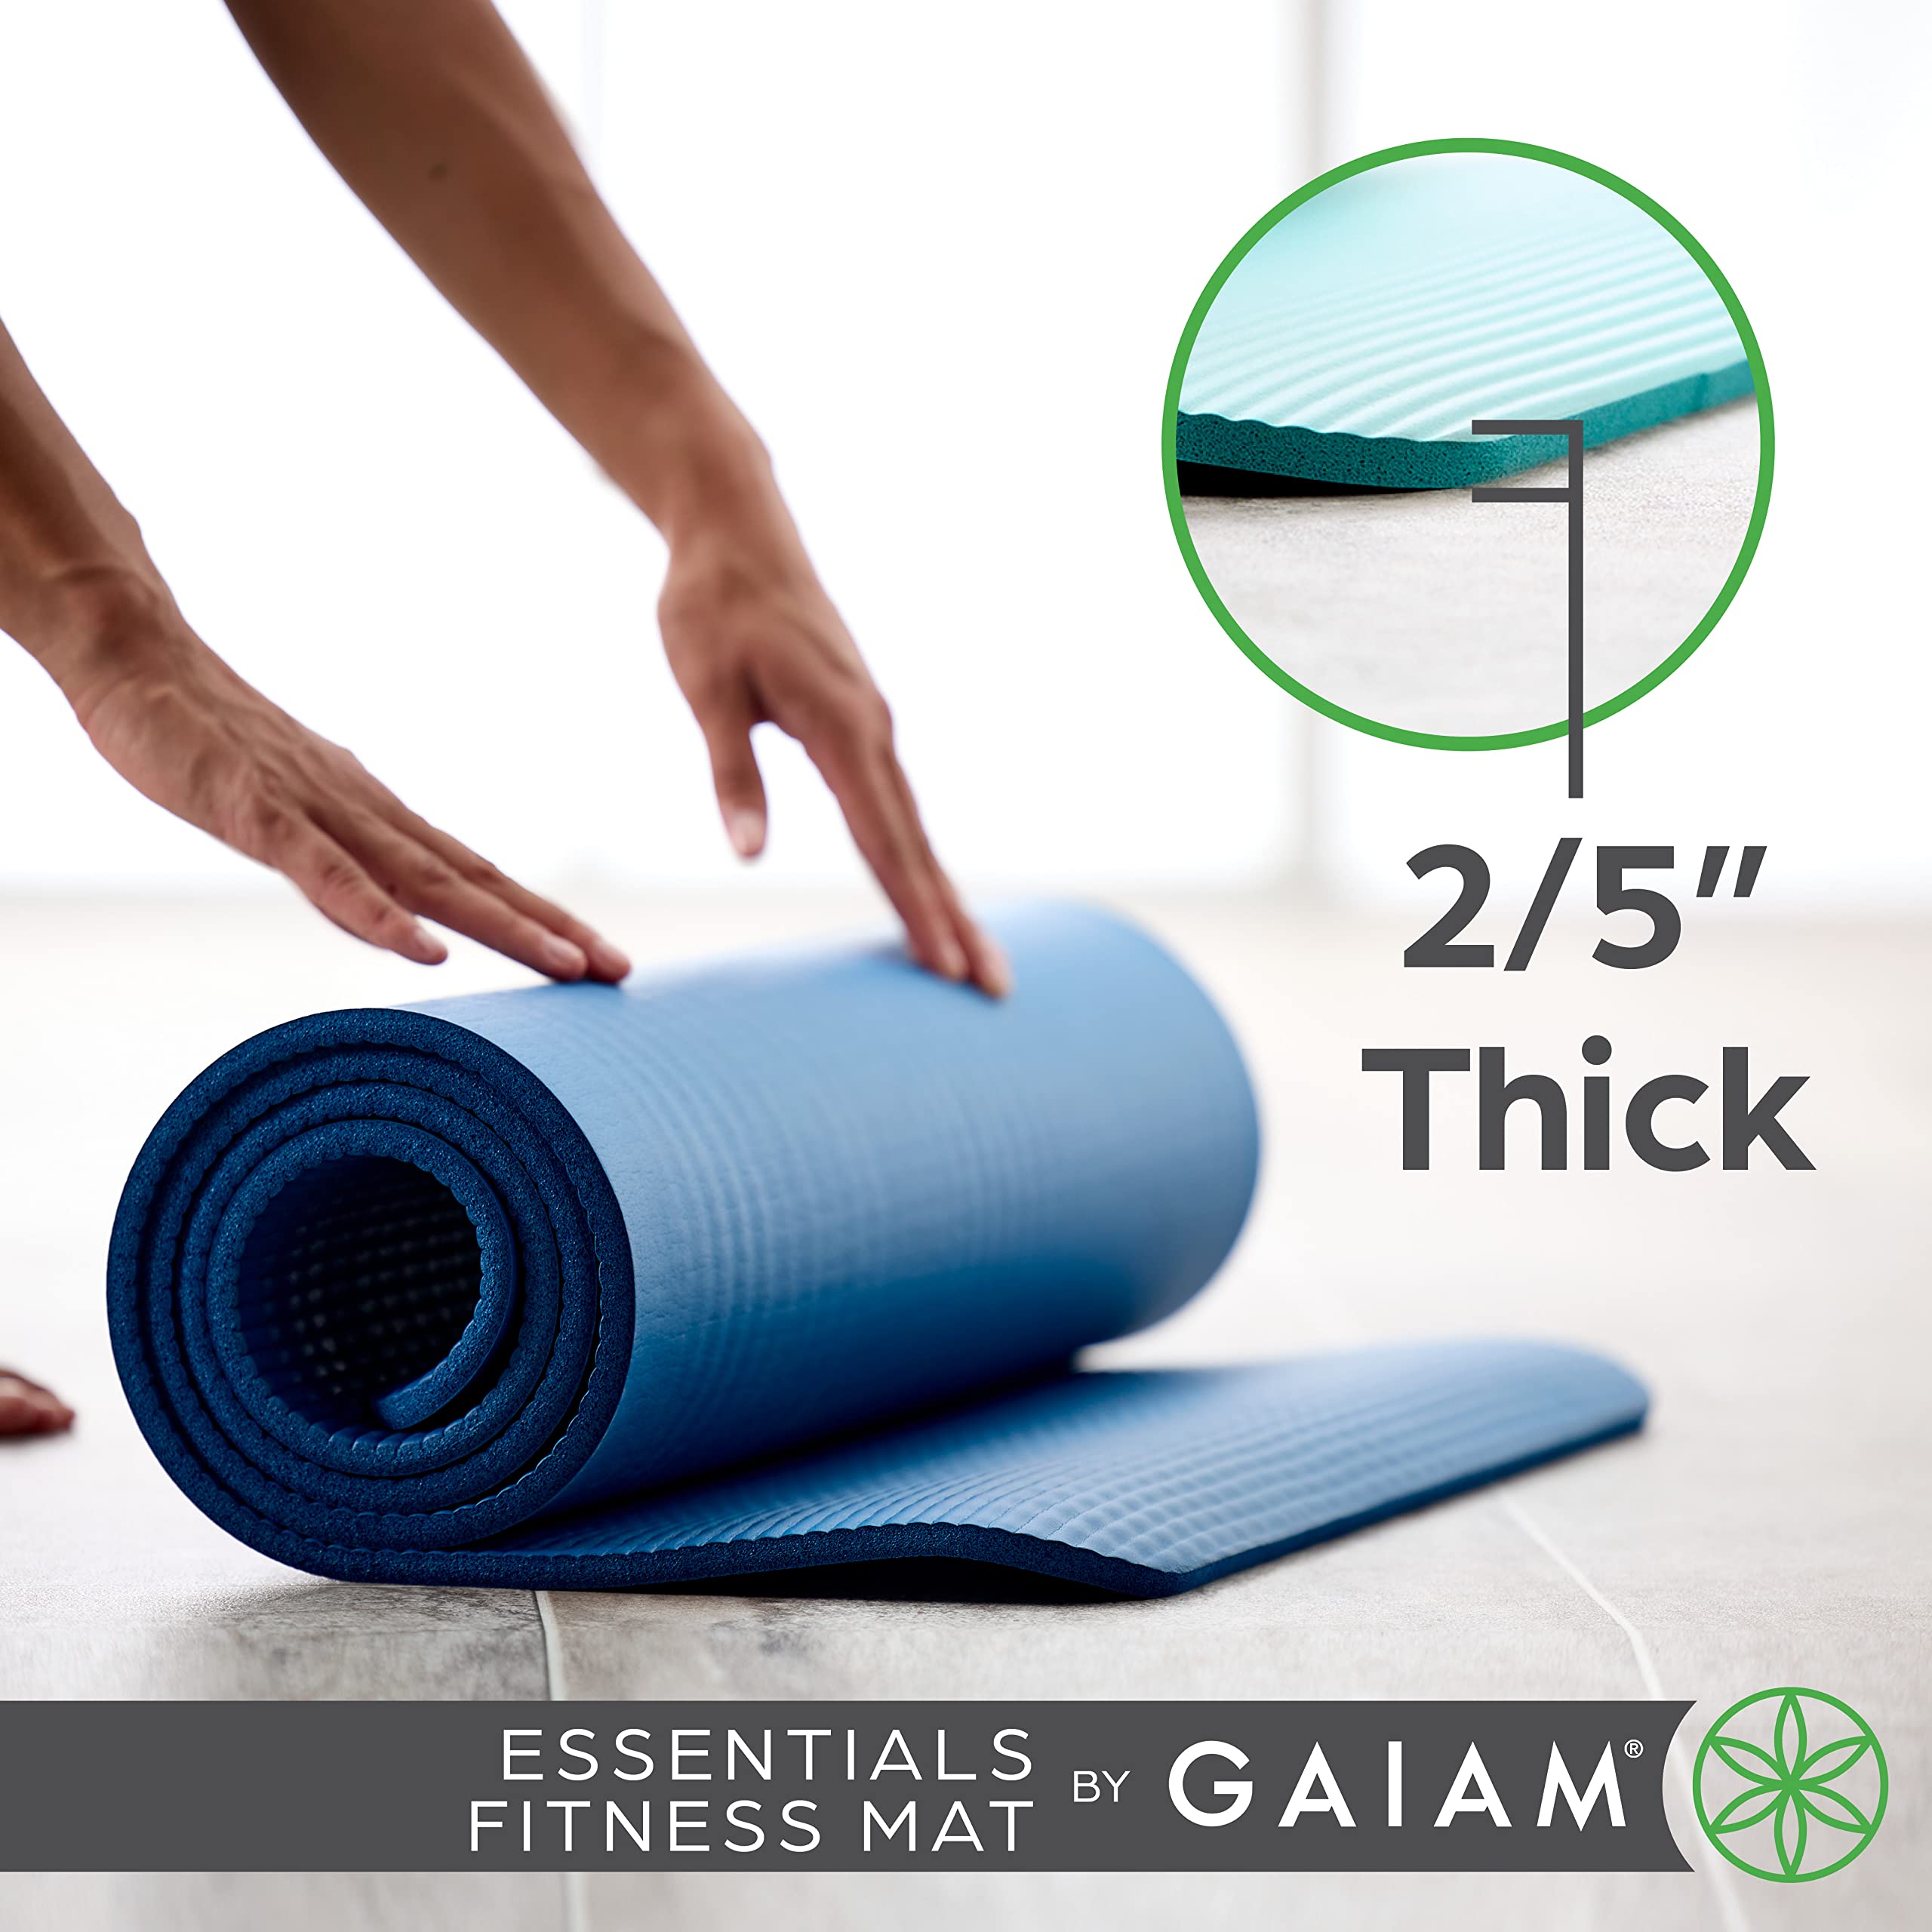 Gaiam Essentials Thick Yoga Mat - Fitness and Exercise Mat with Easy-Cinch Carrier Strap Included - Soft Cushioning and Textured